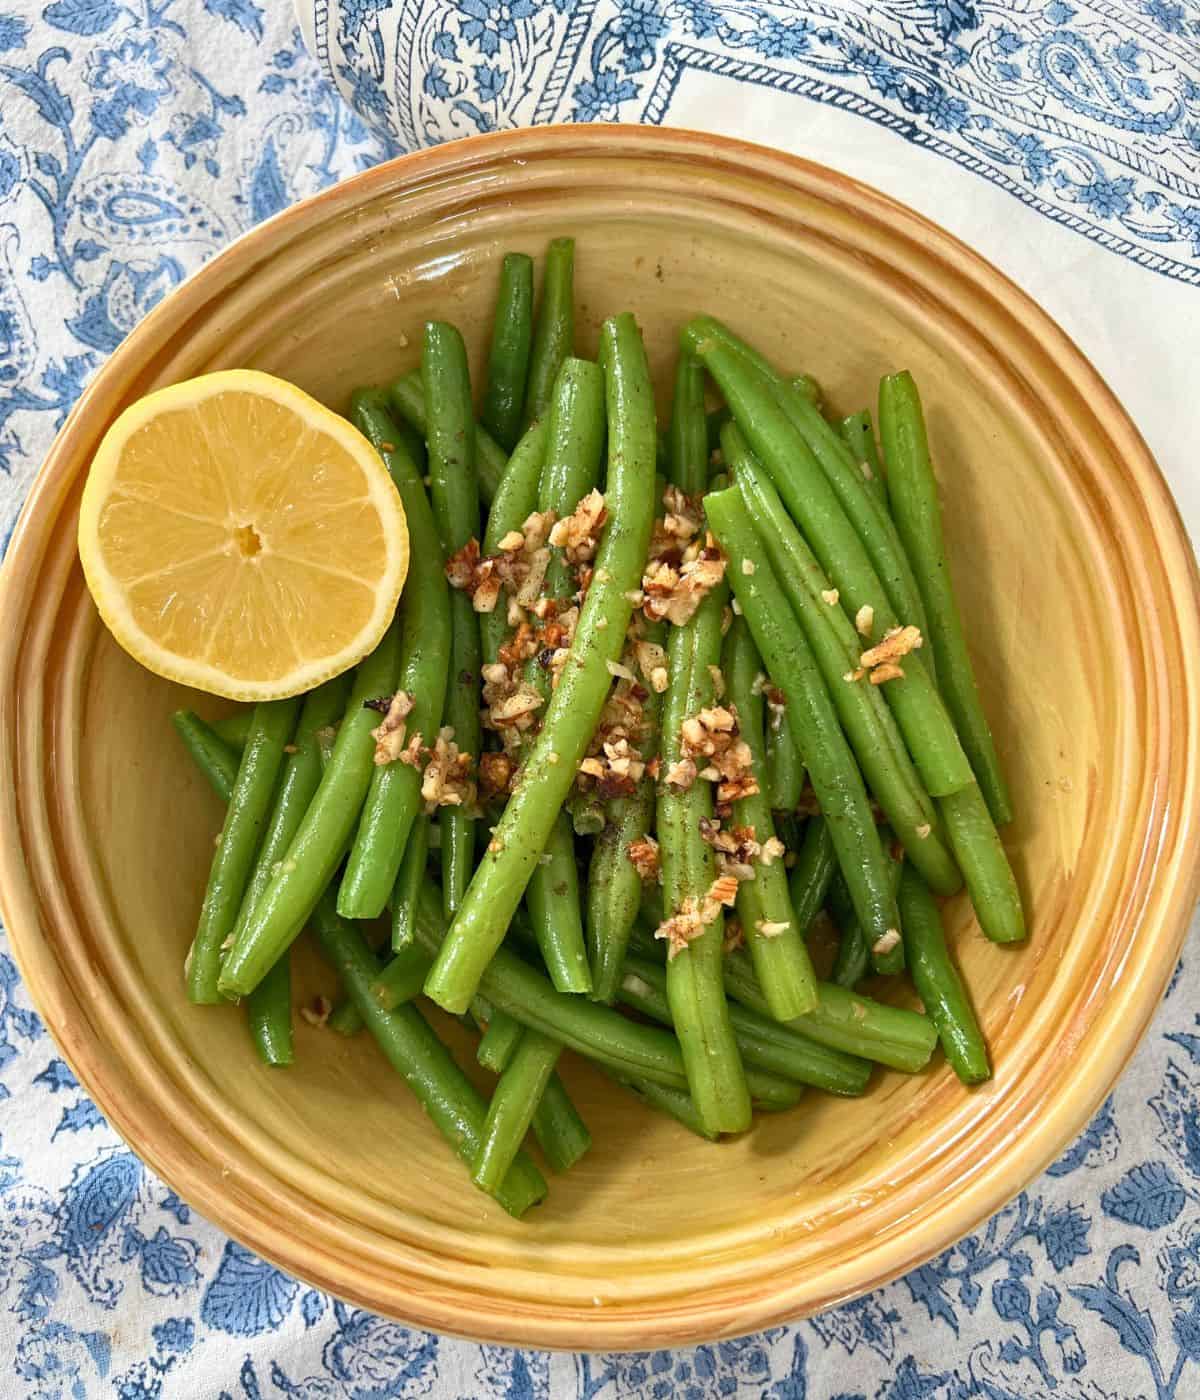 Sautéed green beans with garlic and lemon in a yellow bowl.